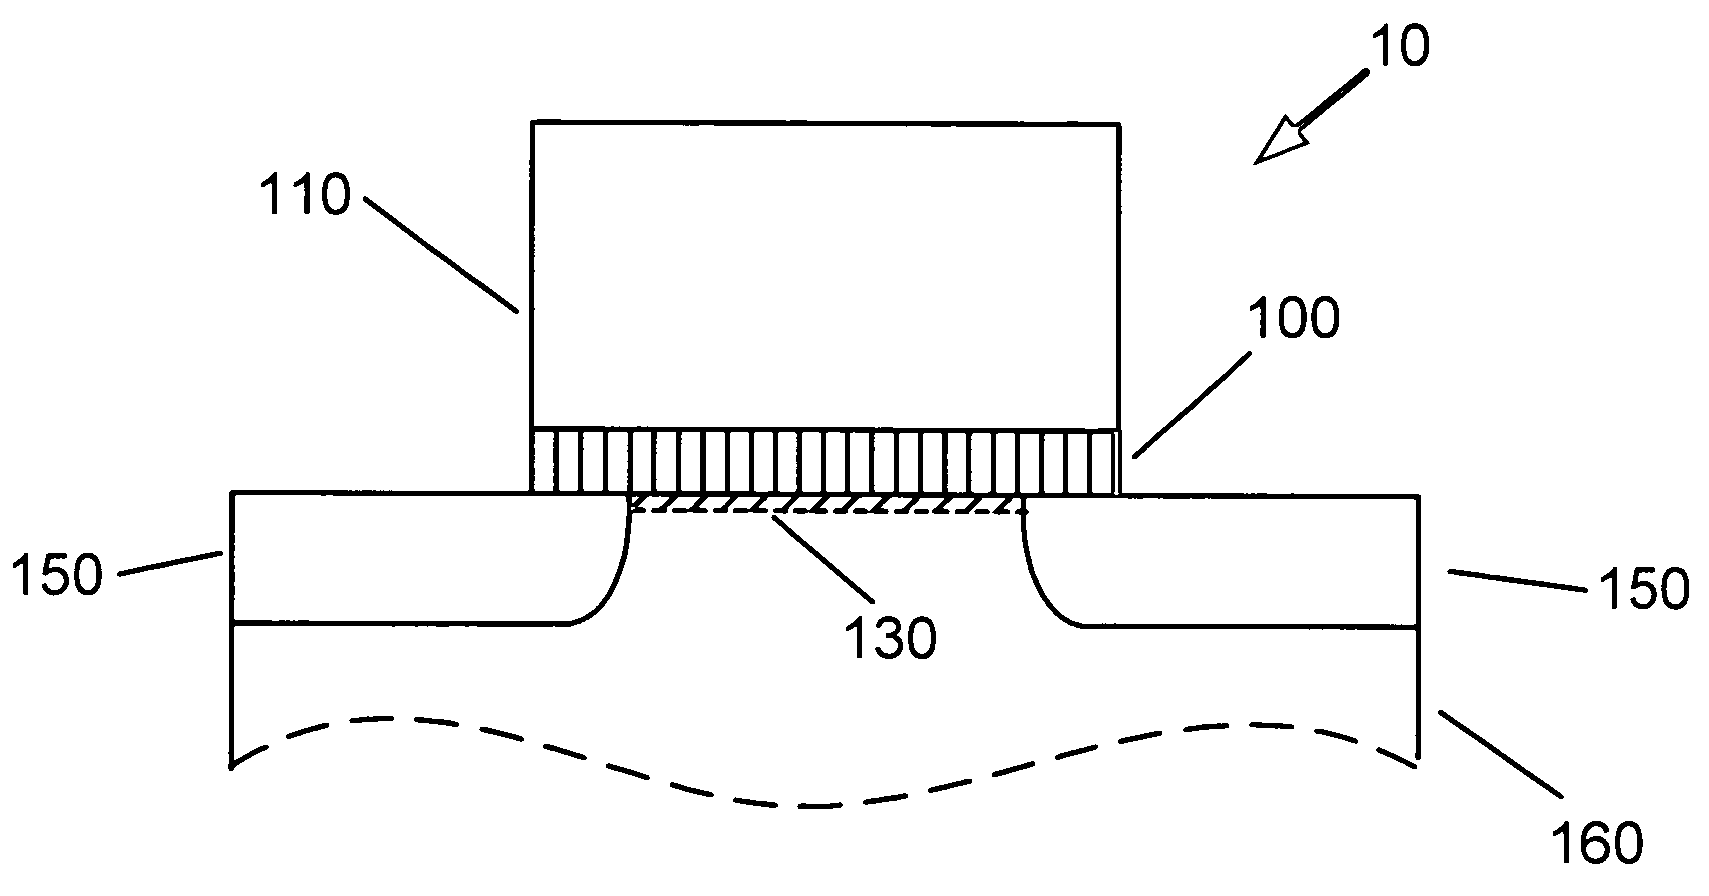 Germanate gate dielectrics for semiconductor devices